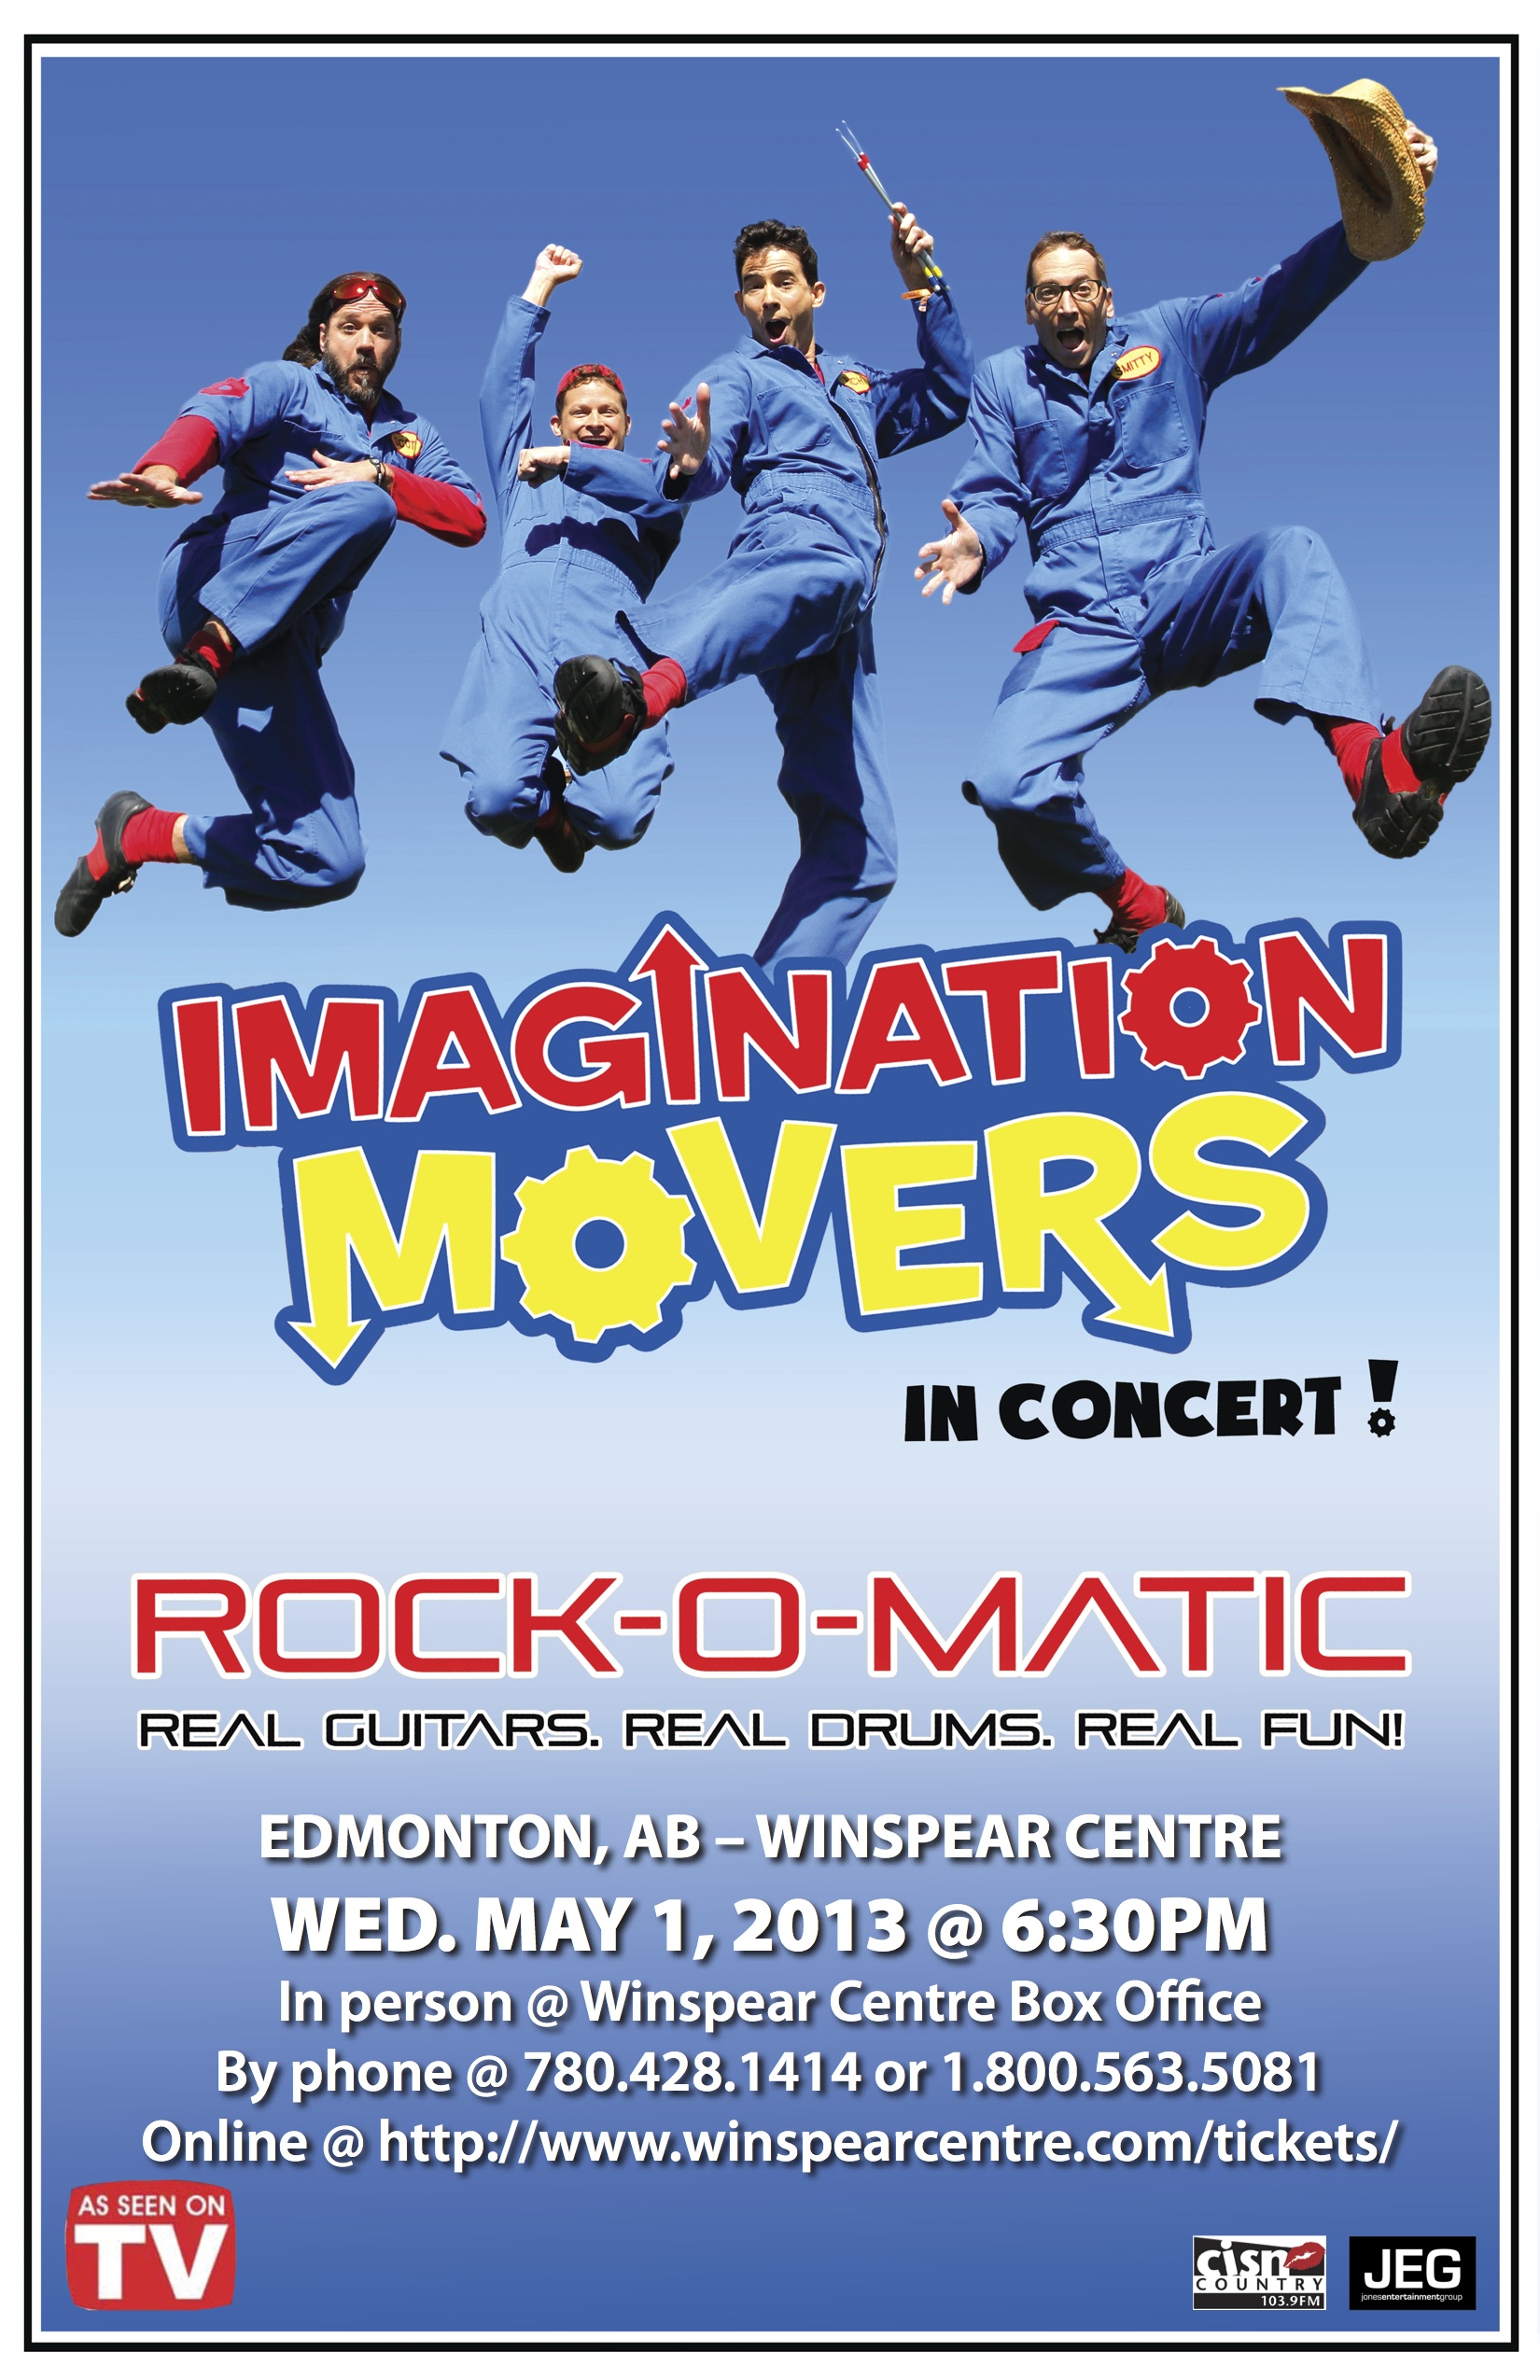 Imagination Movers at the Winspear Centre